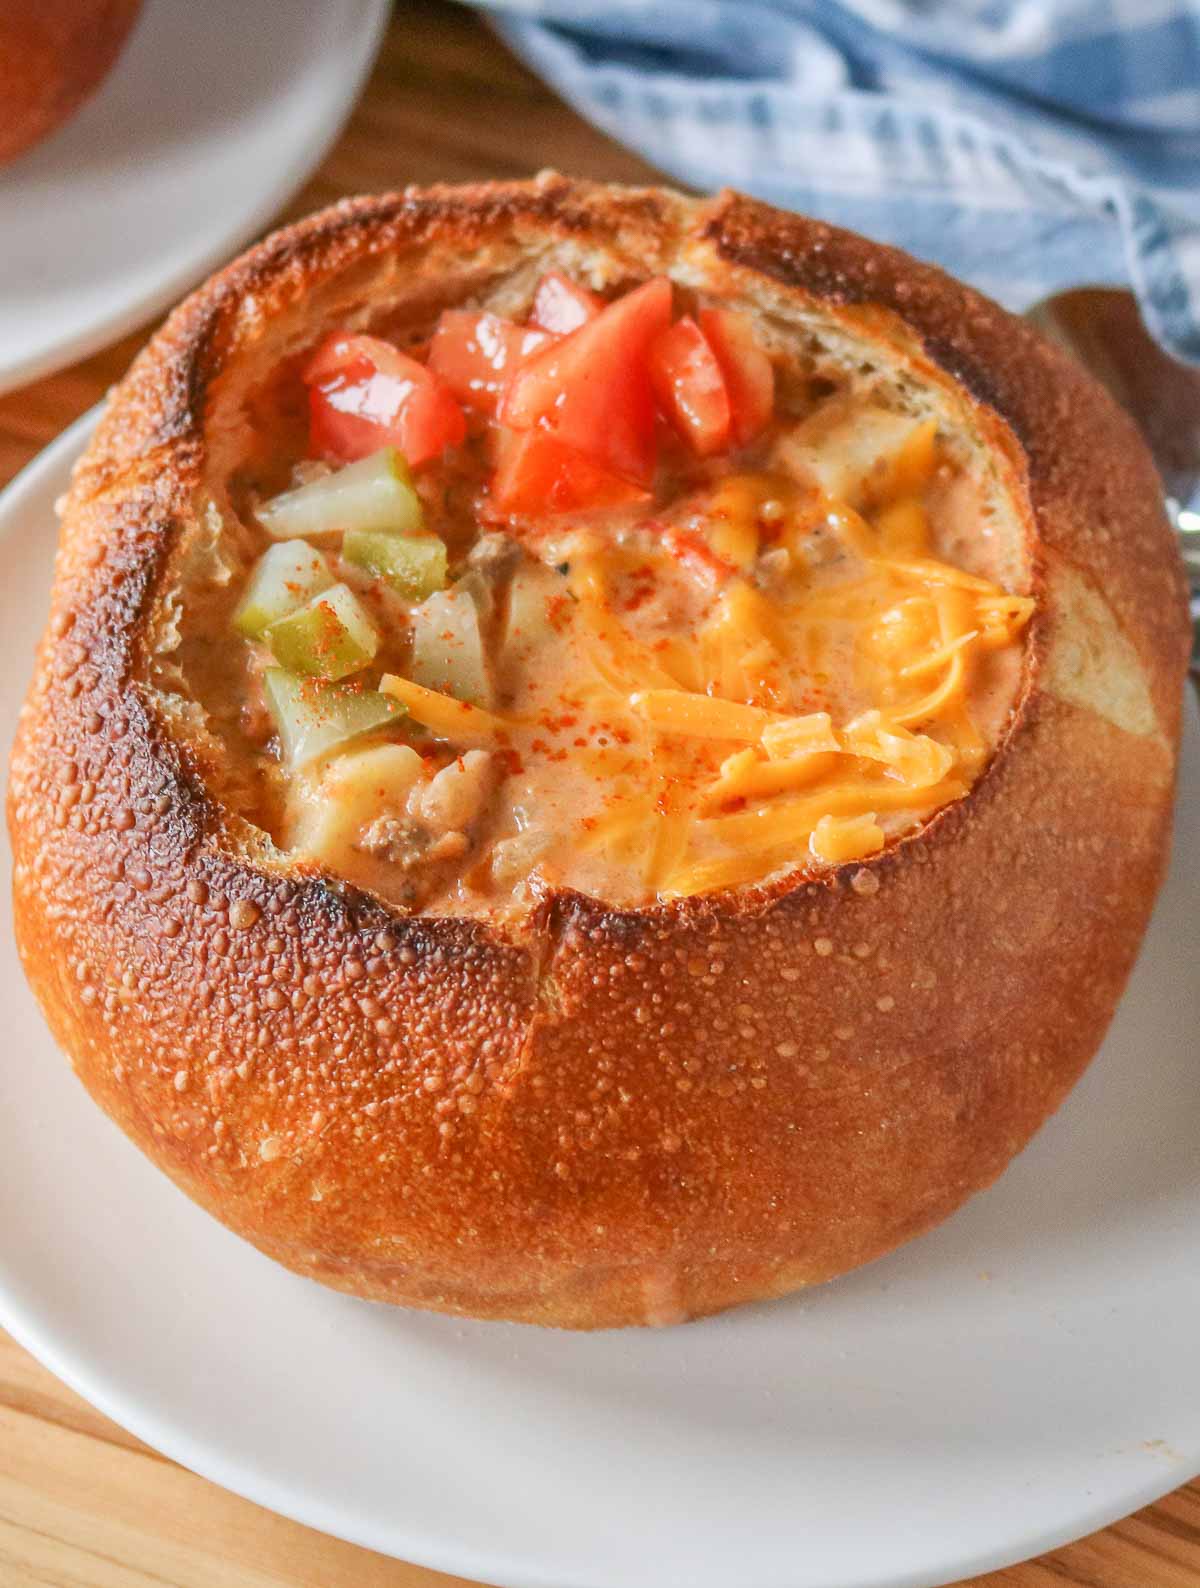 Cheeseburger soup in a bread bowl garnished with pickles, tomatoes and cheese.